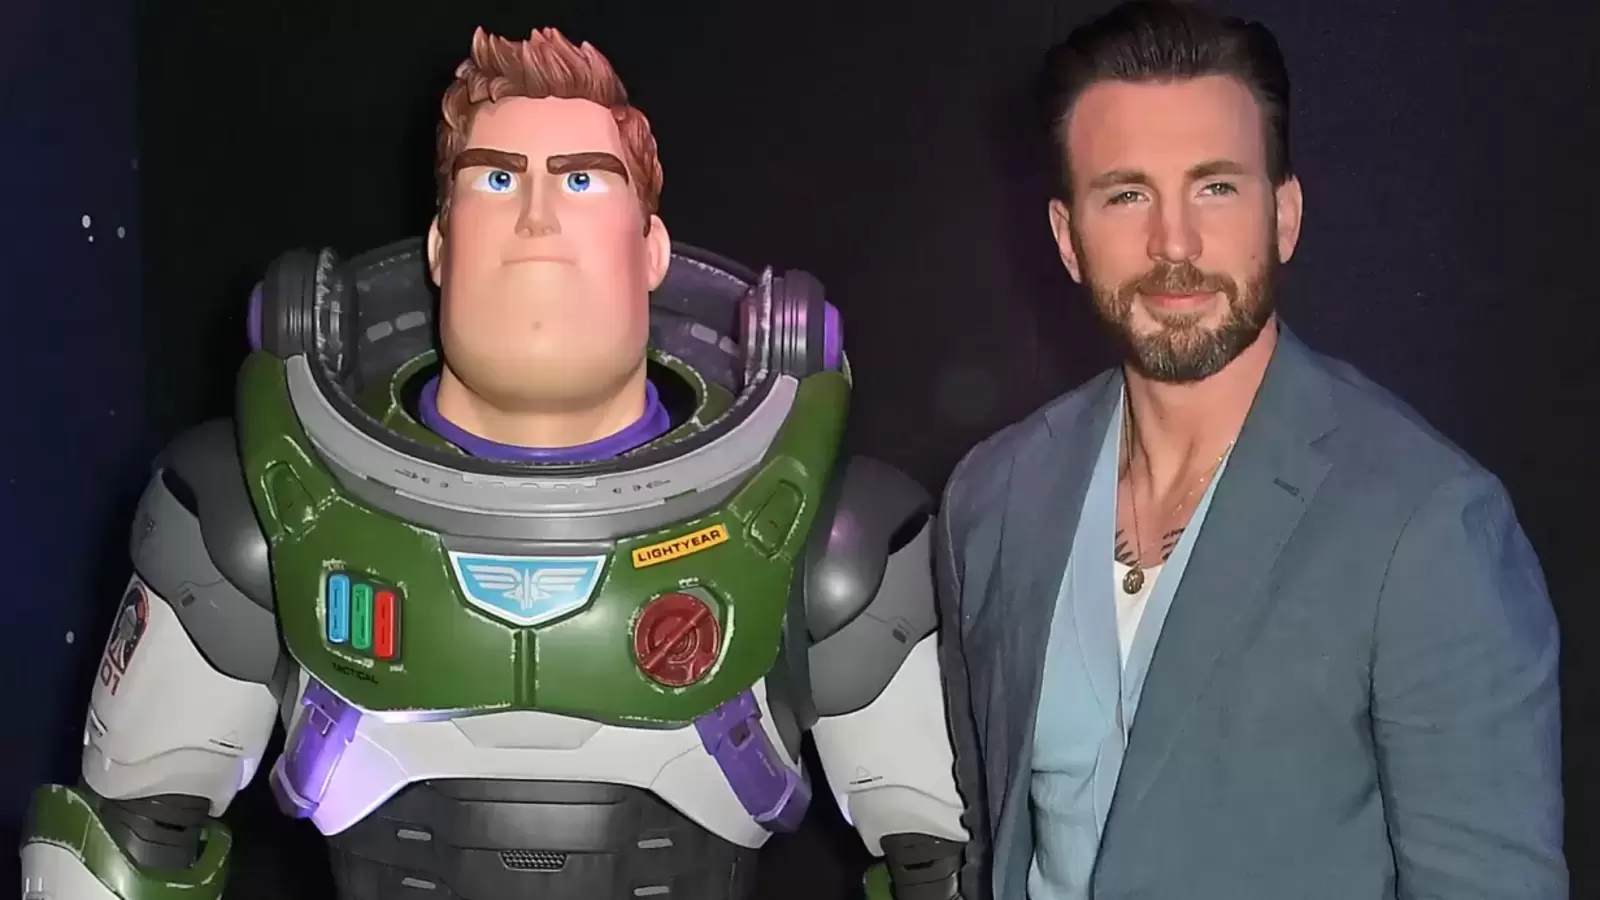 Fans gets offended by Chris Evans' Lightyear